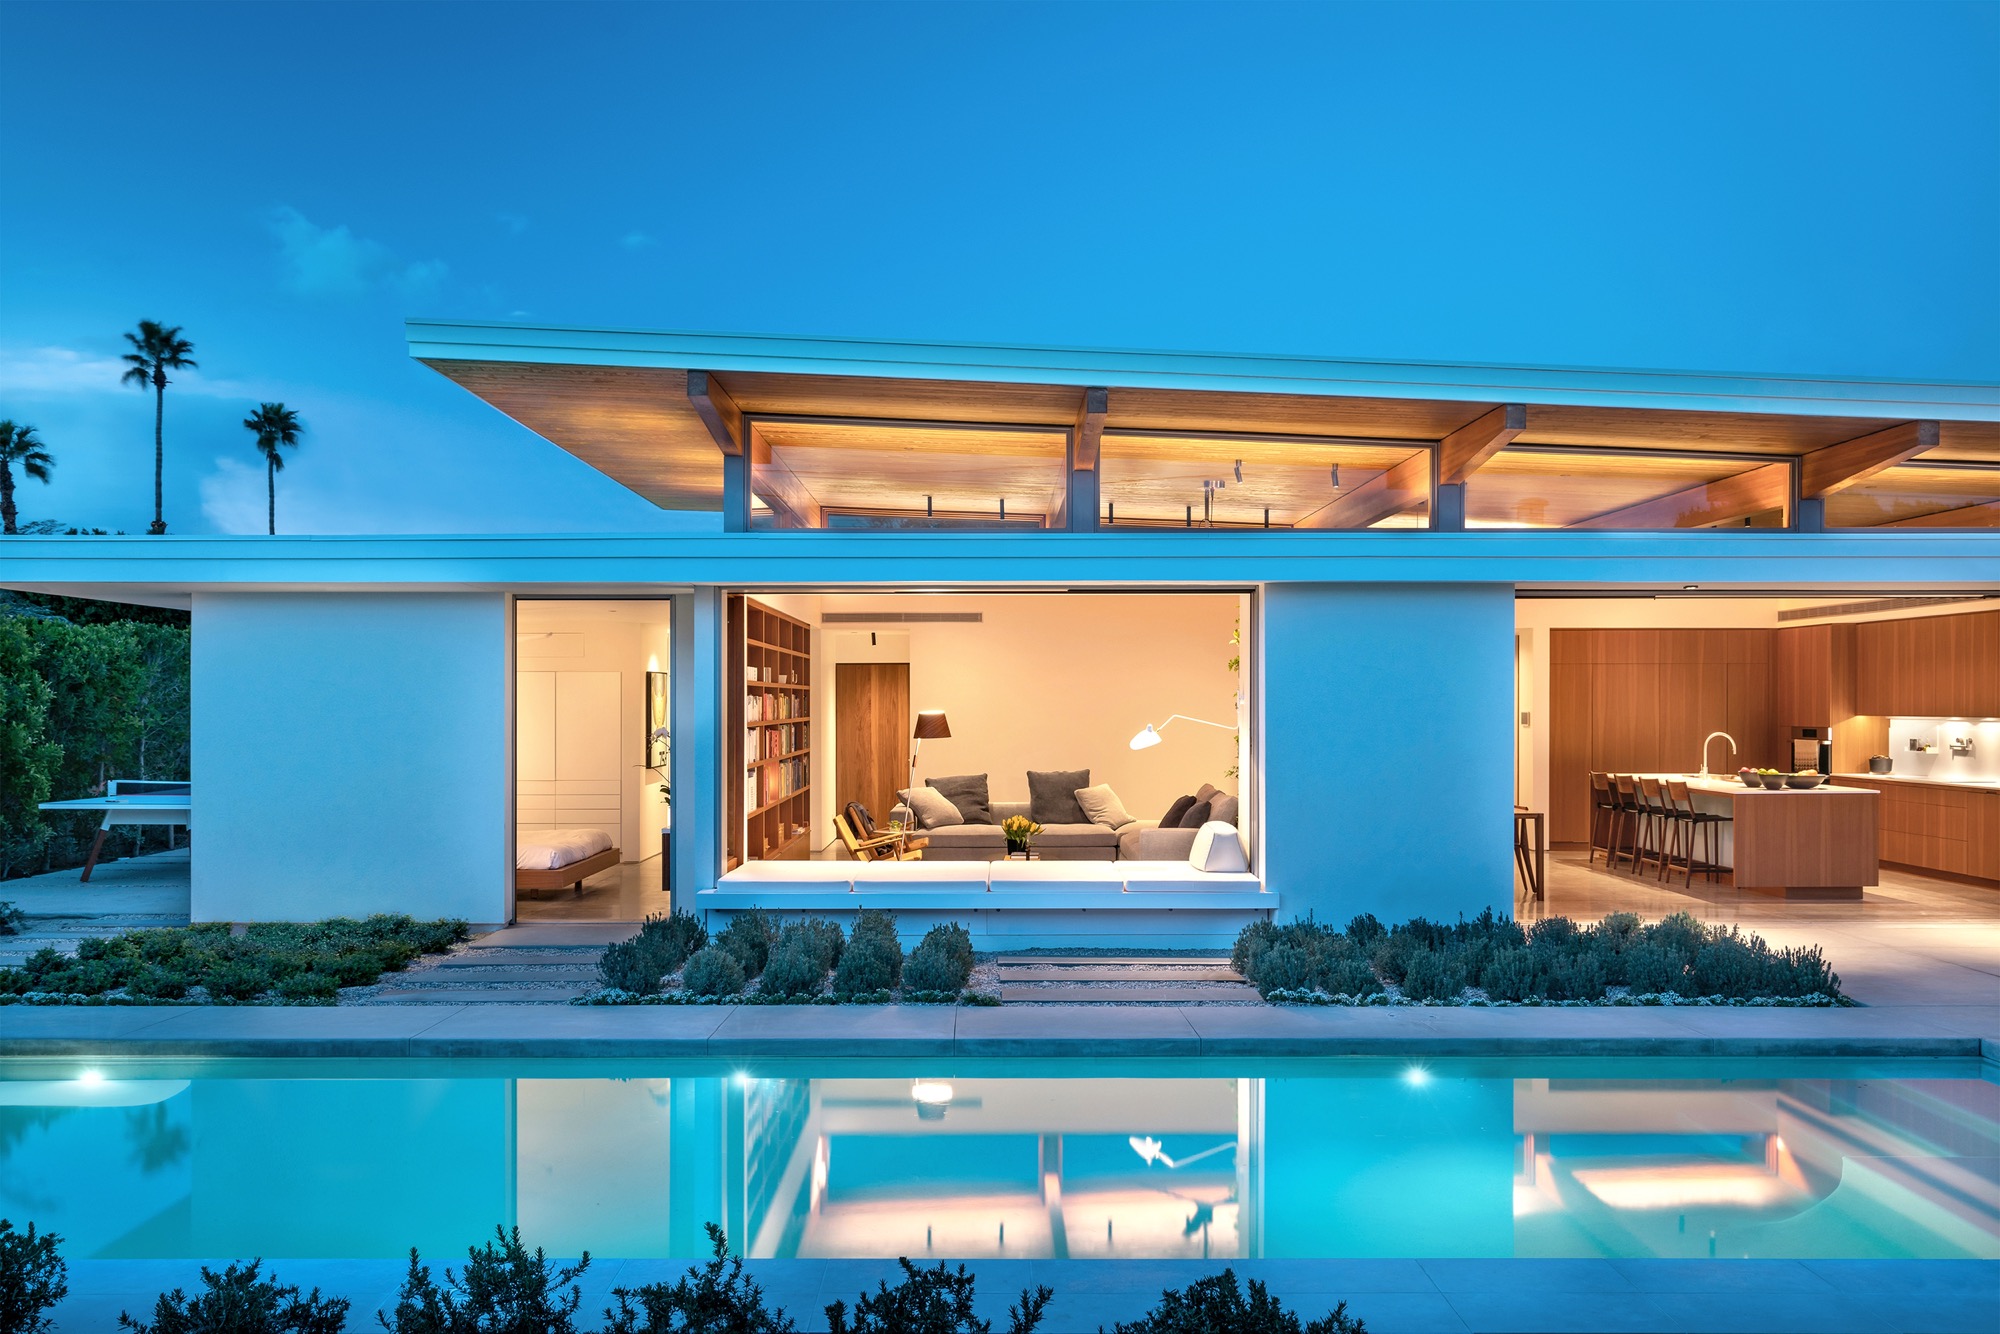 View of the interior of a modern custom prefab home from the outdoor pool and courtyard at night